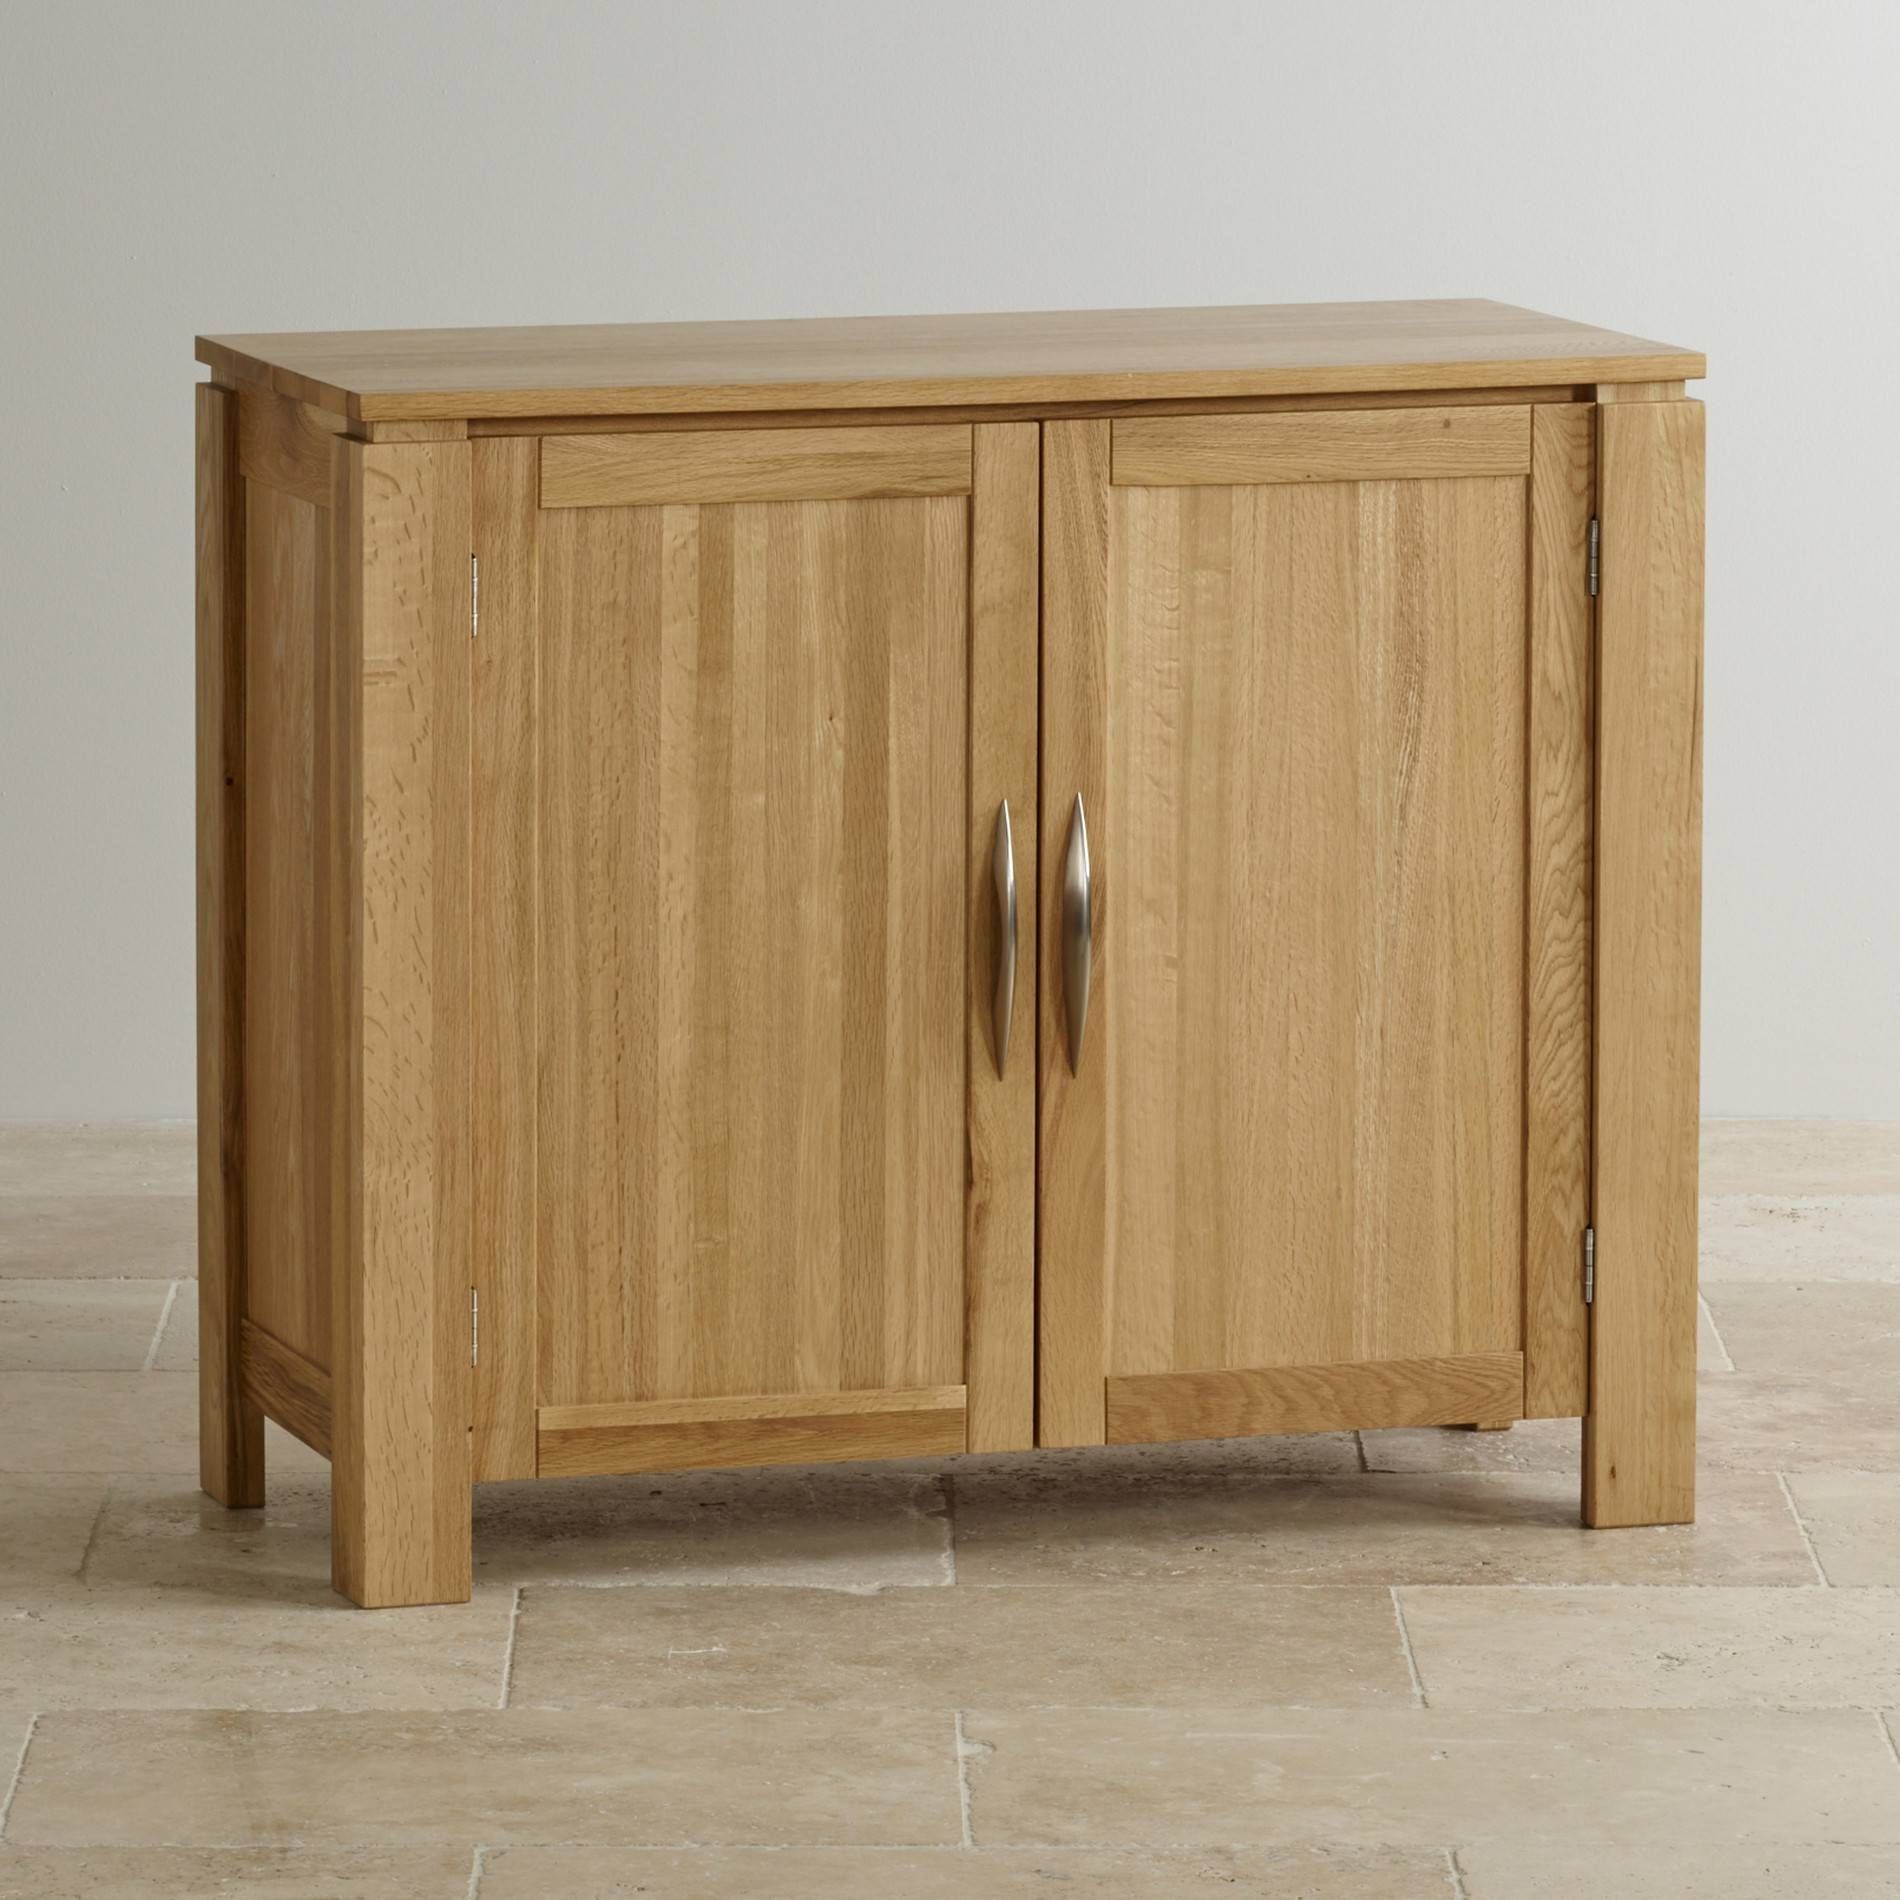 Galway Small Sideboard In Natural Solid Oak | Oak Furniture Land With Small Wooden Sideboards (View 3 of 15)